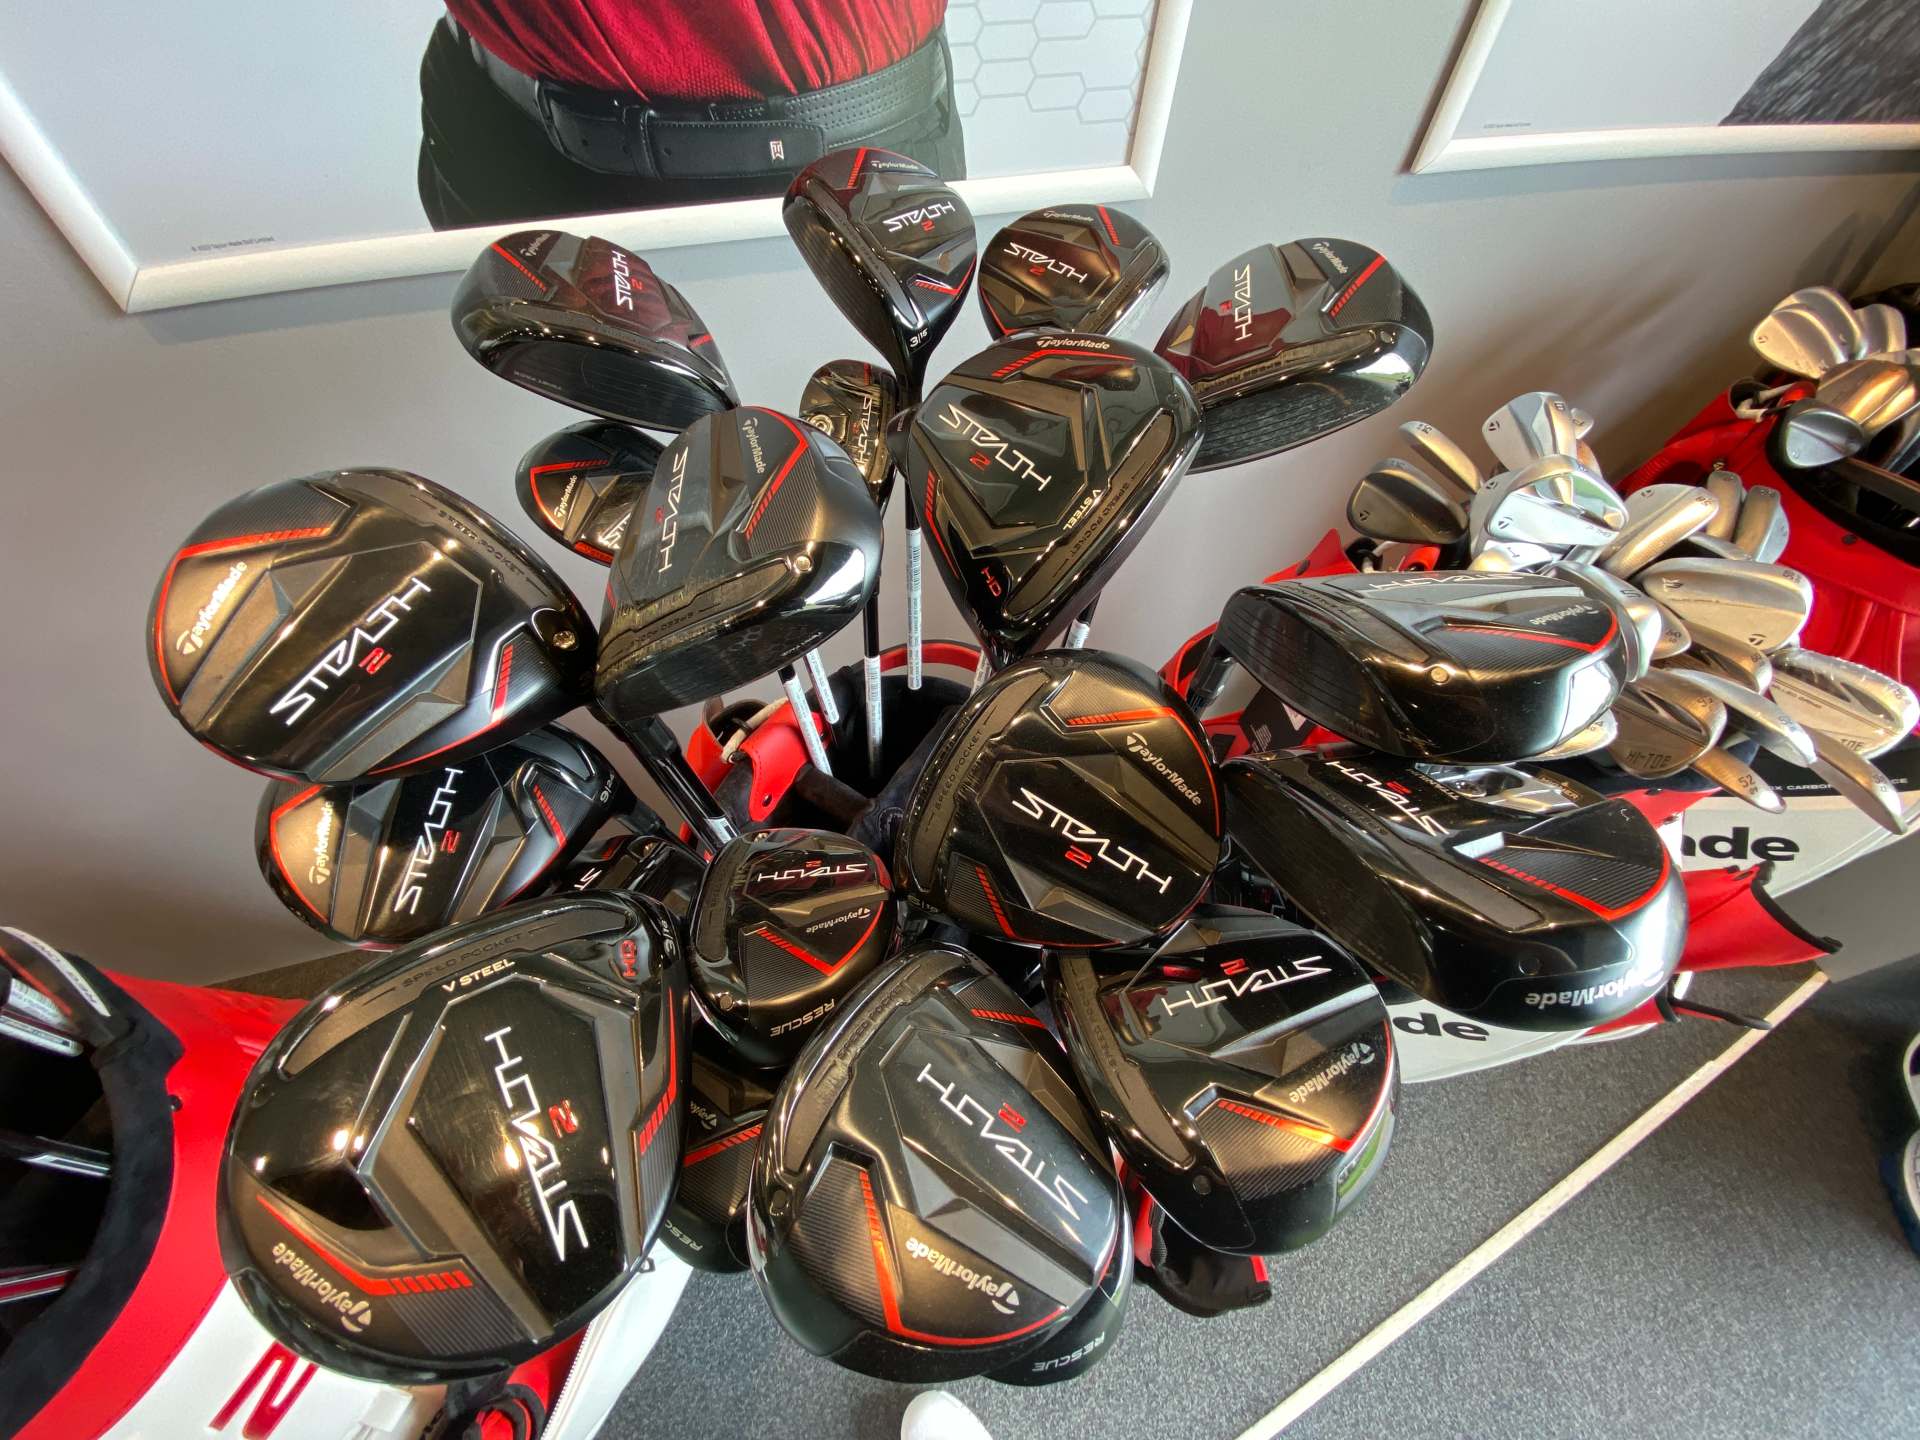 Do we really need 14 golf clubs in our bag? - National Club Golfer